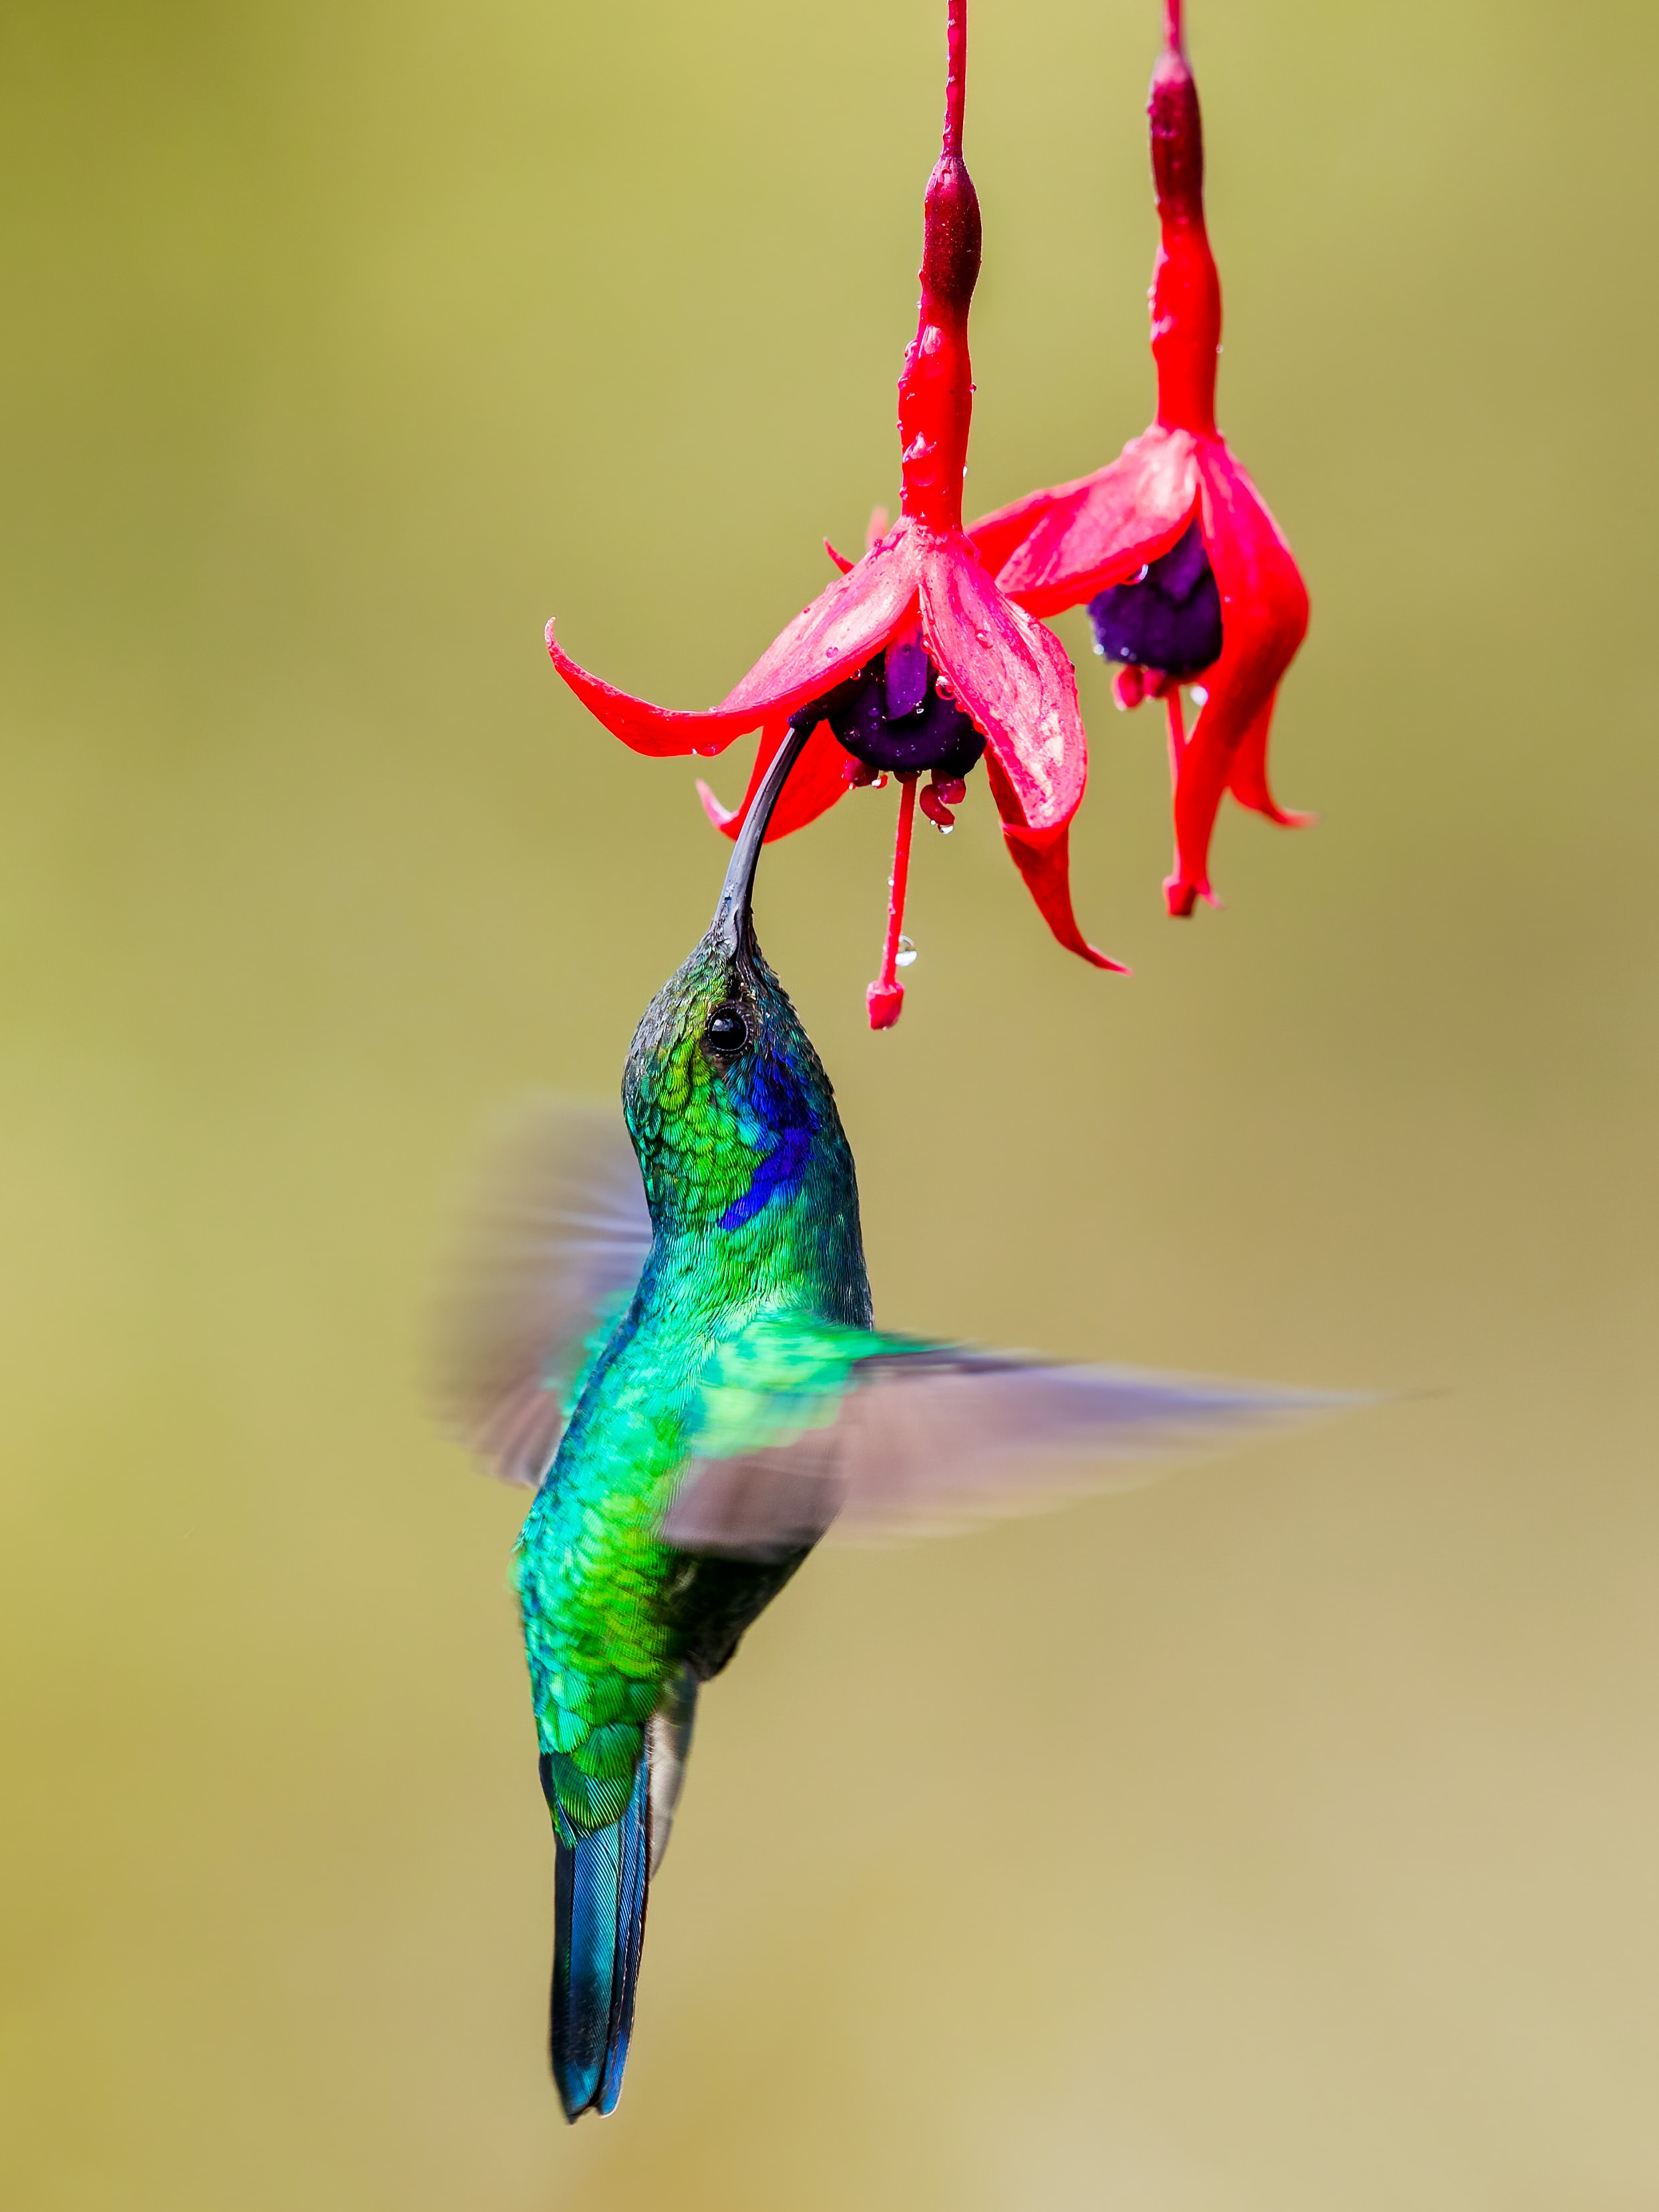 94683 1920x1200 PC pictures for free, download animals, fuchsia, flowers, humming-birds 1920x1200 wallpapers on your desktop